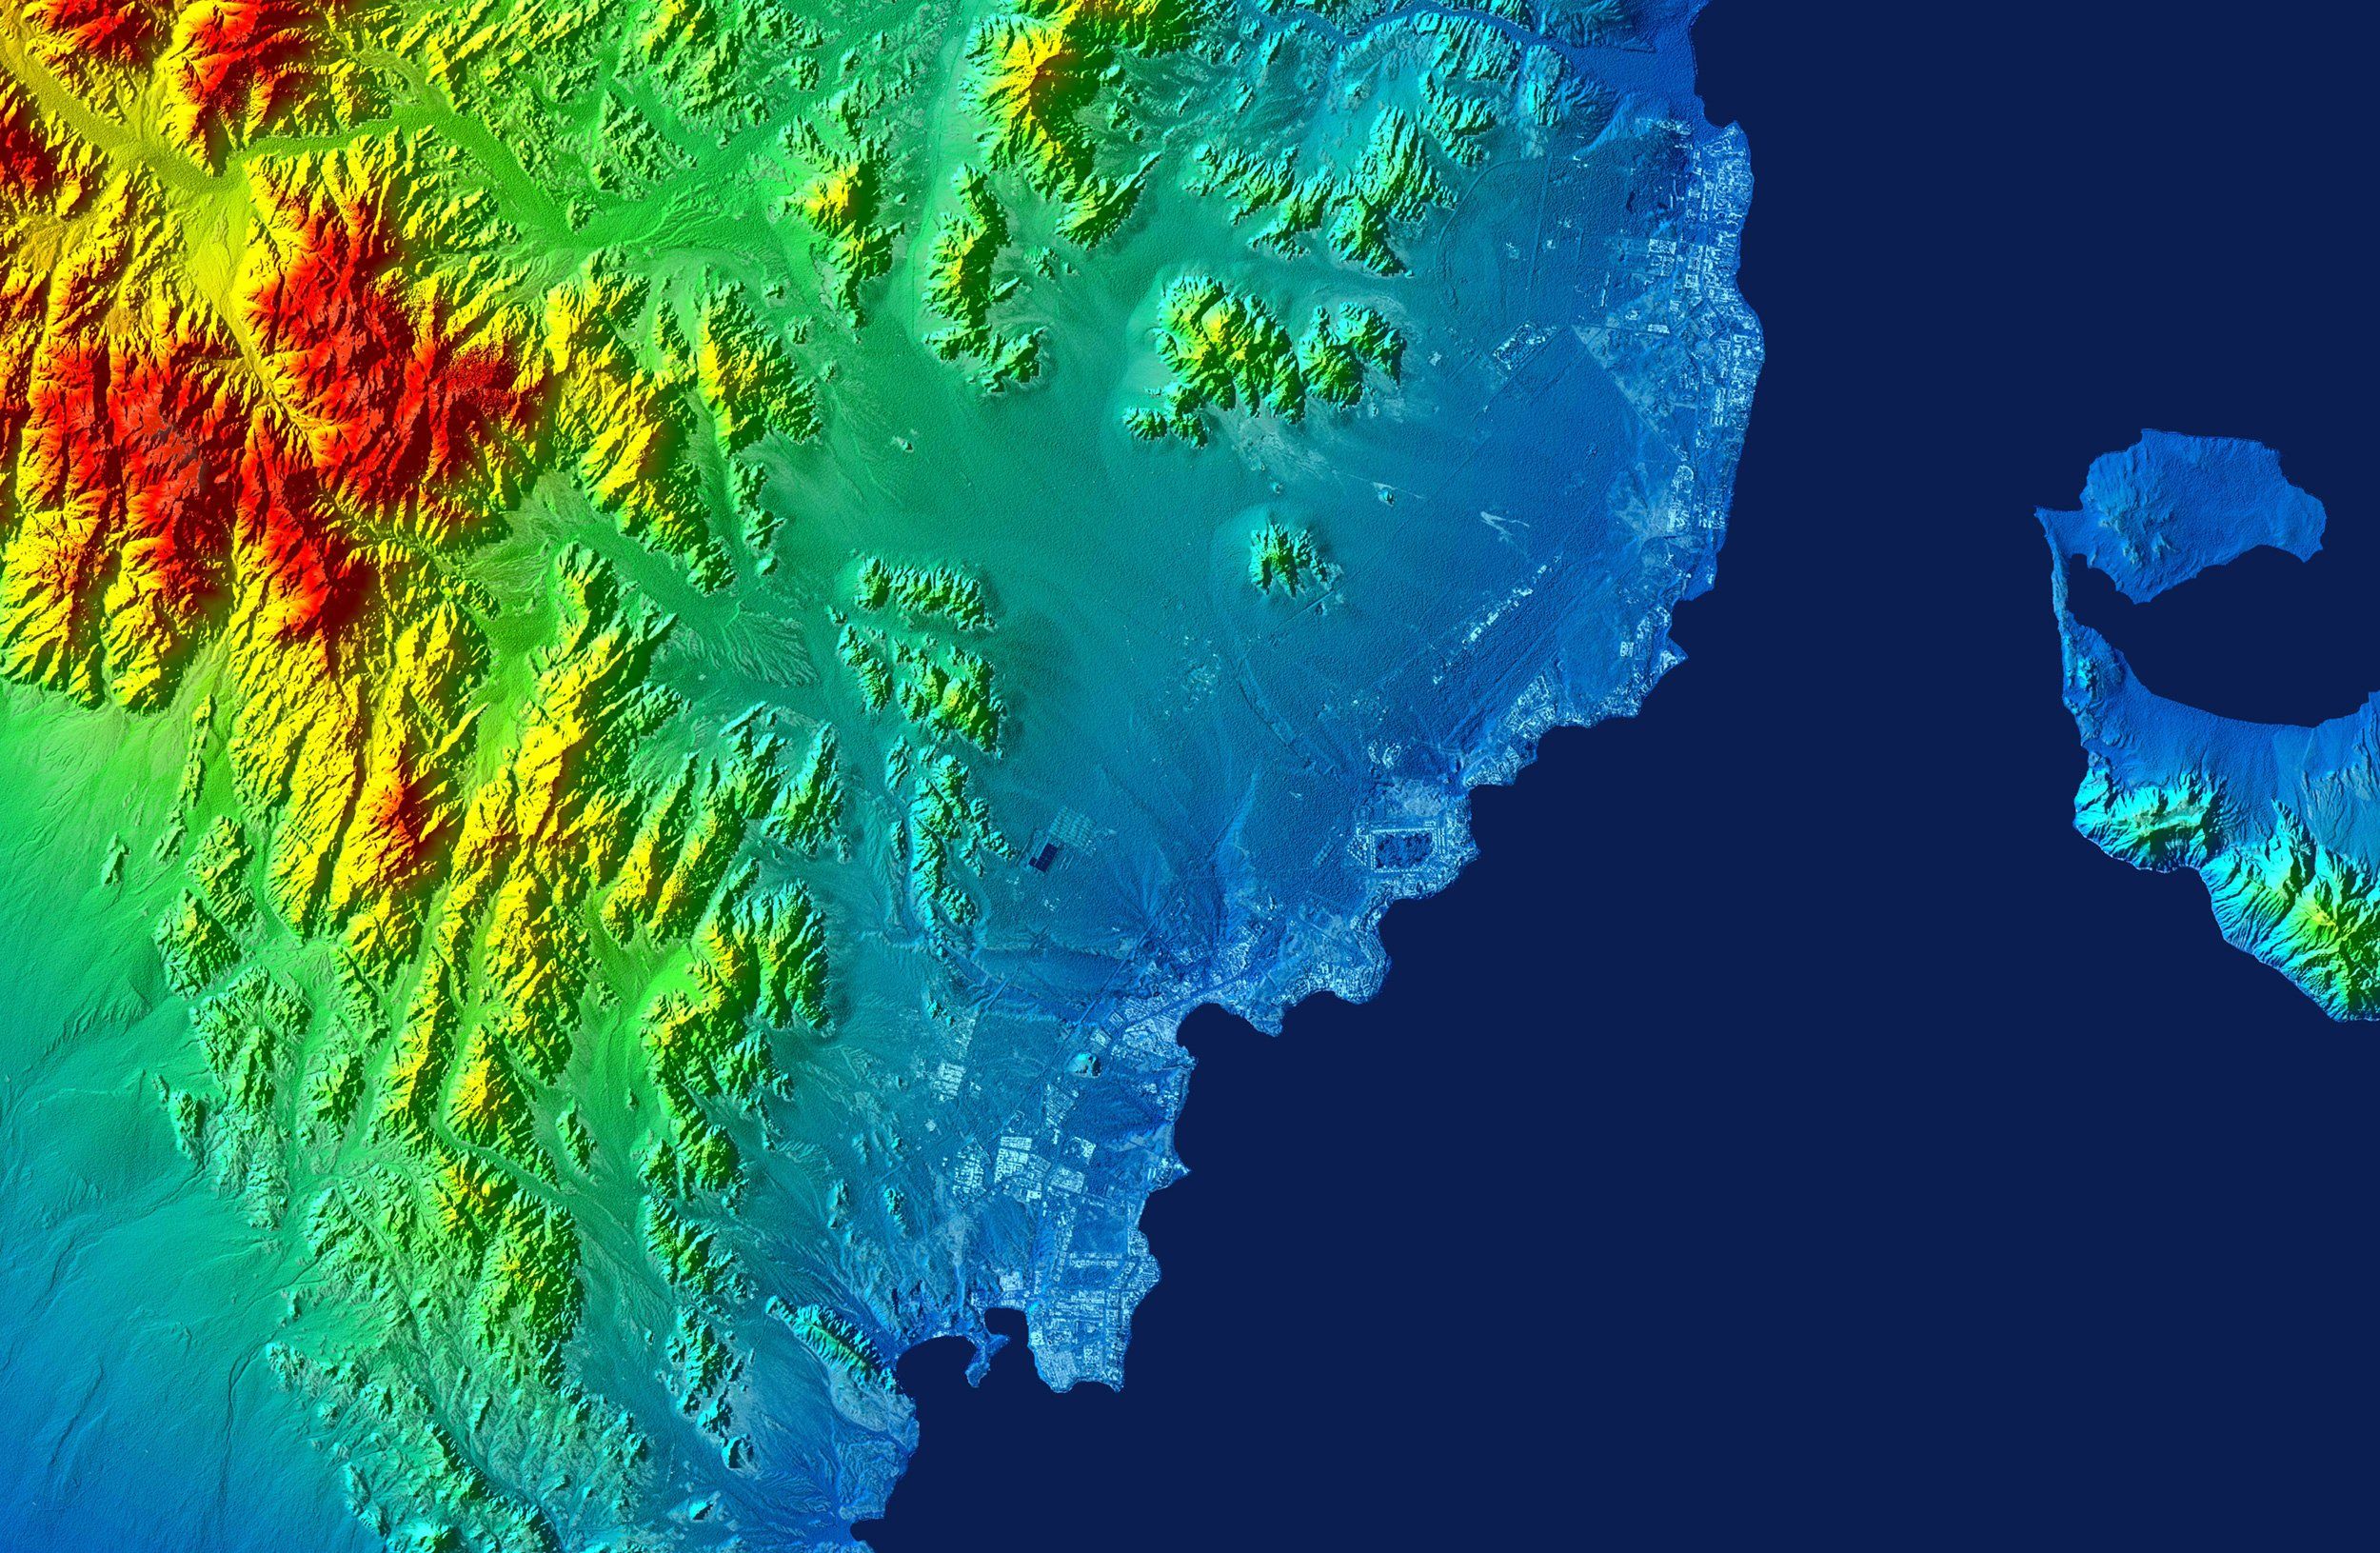 A map showing multiple colors for elevation.